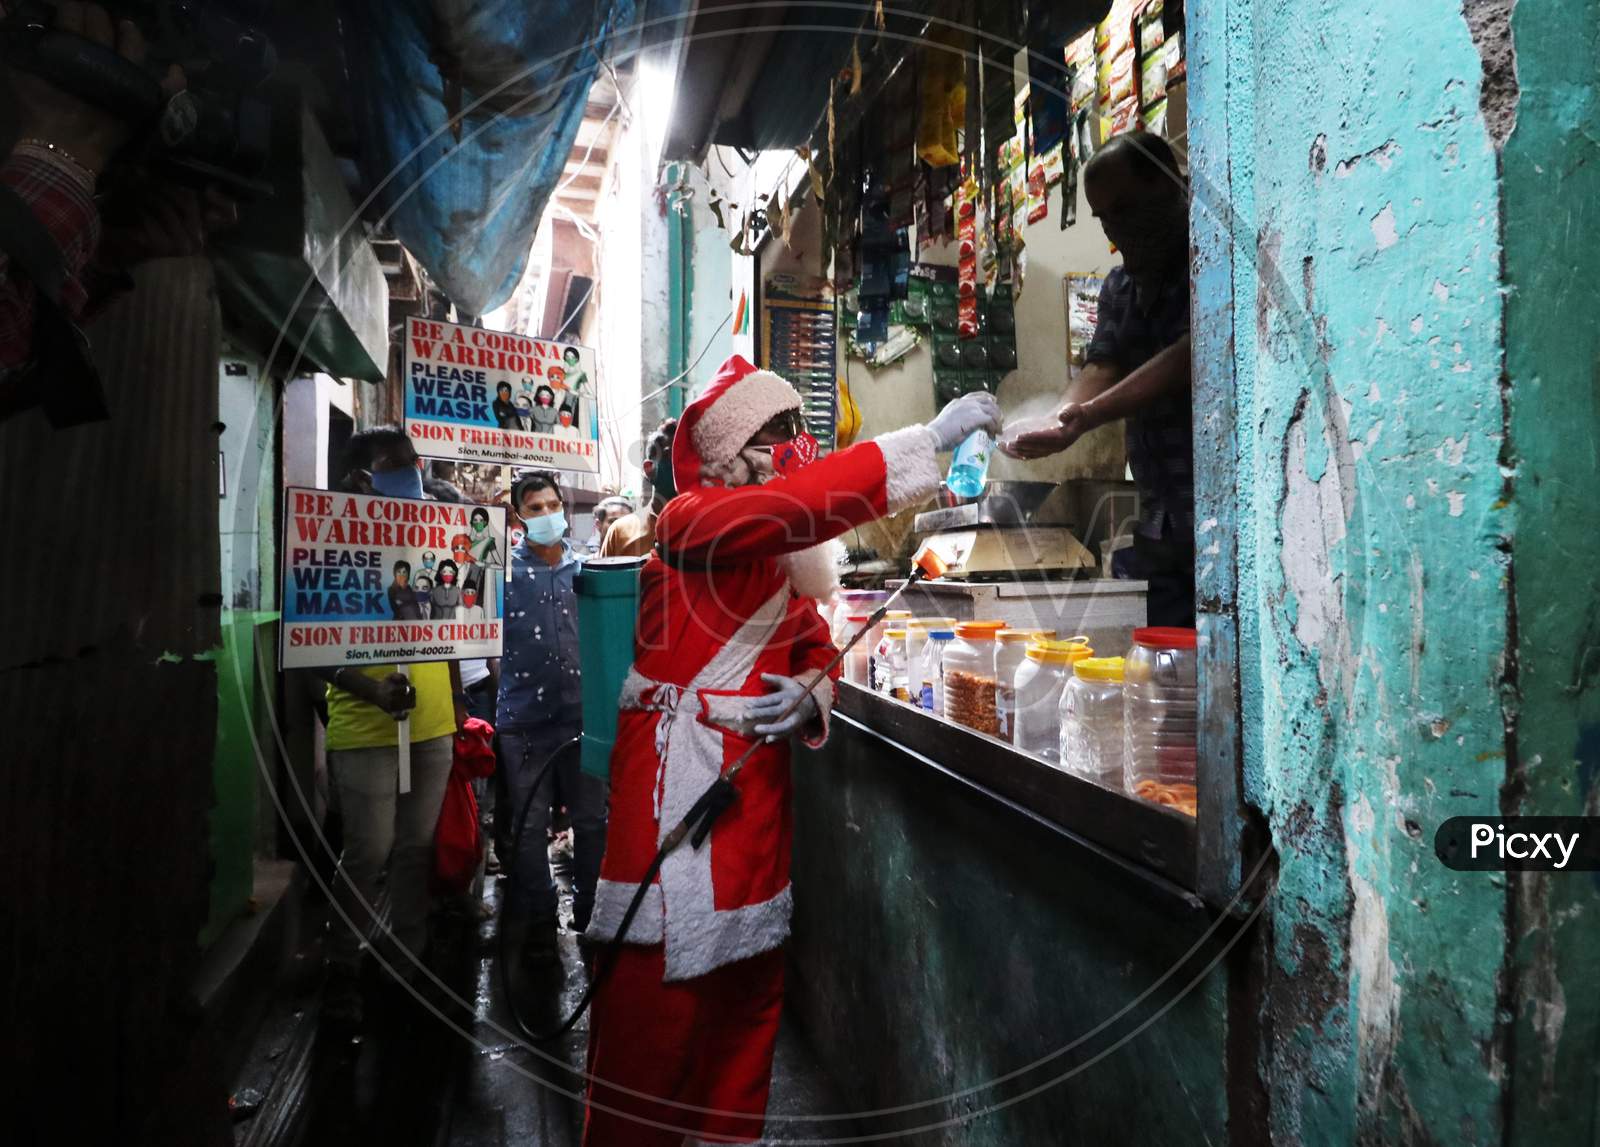 A man wearing a Santa Claus costume sanitizes the hands of a shopkeeper inside a slum, amidst the spread of the coronavirus disease (COVID-19), in Mumbai, India, December, 2020.